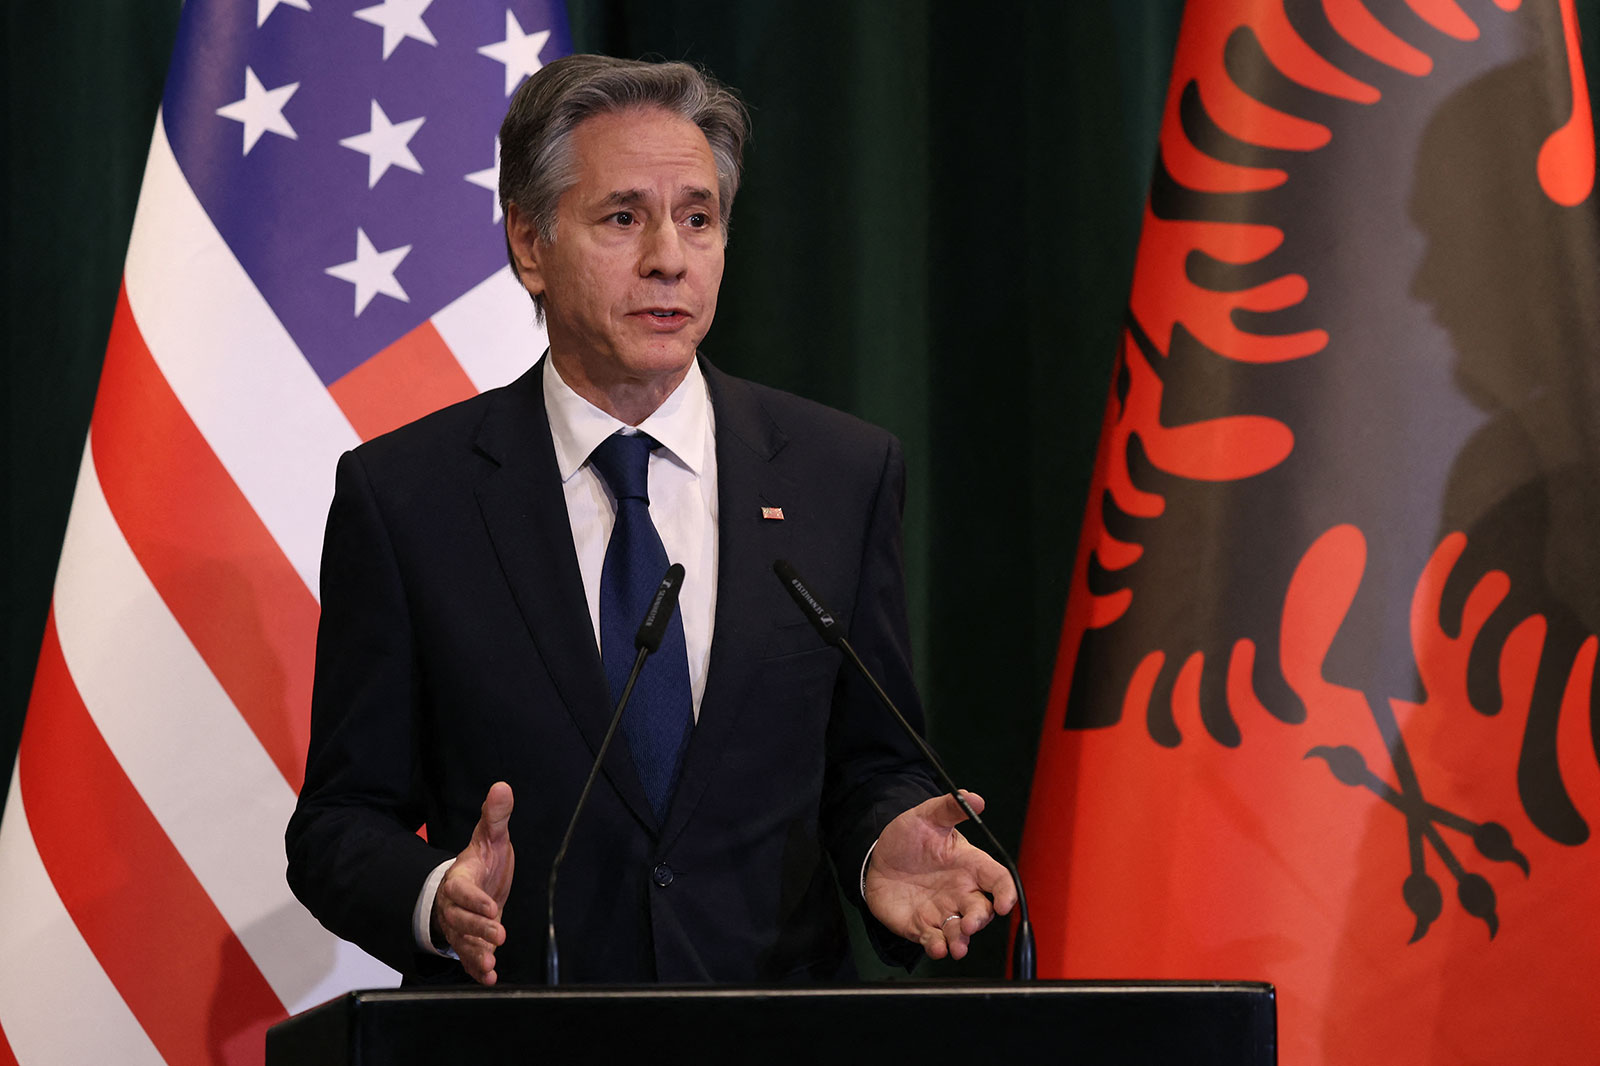 US Secretary of State Antony Blinken speaks during a press conference with Albania's Prime Minister in Tirana on Thursday.